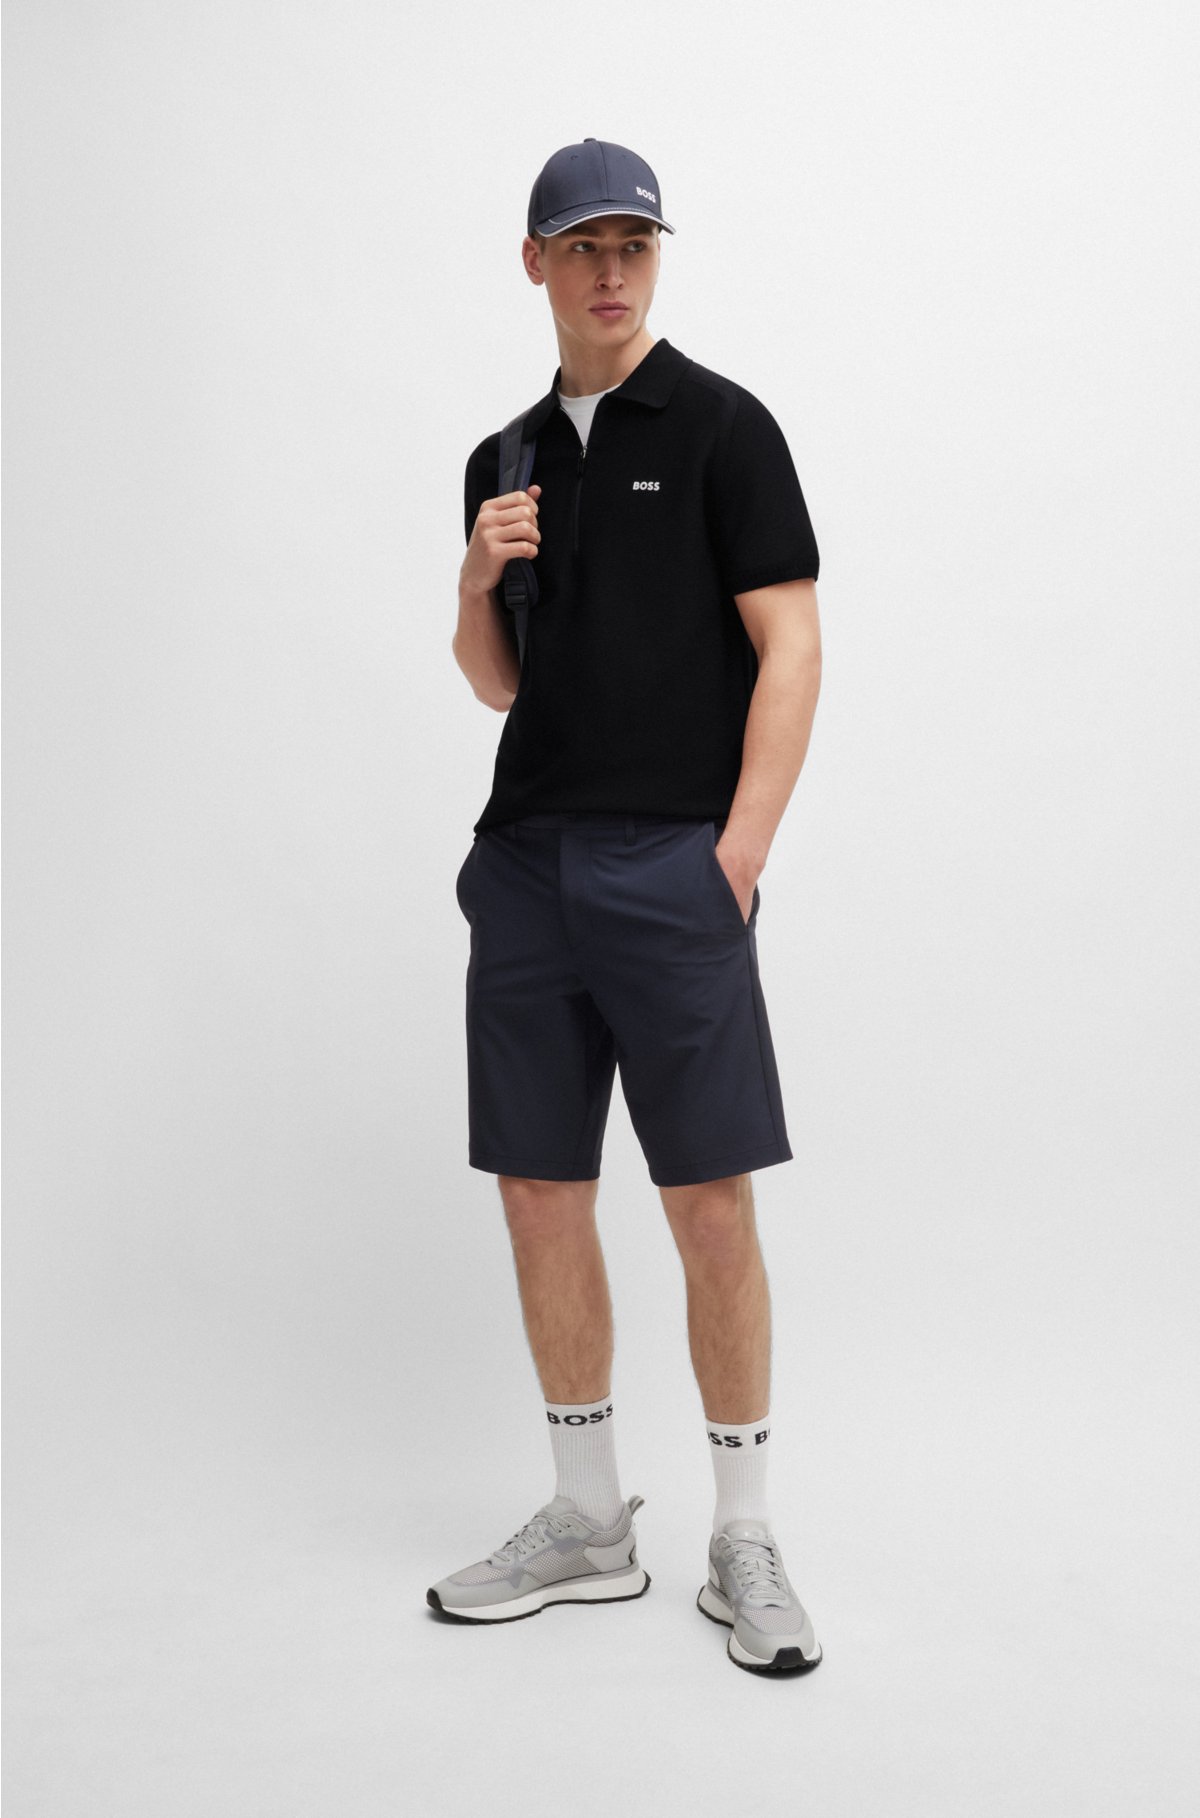 Short-sleeved zip-neck polo sweater with logo detail, Dark Blue